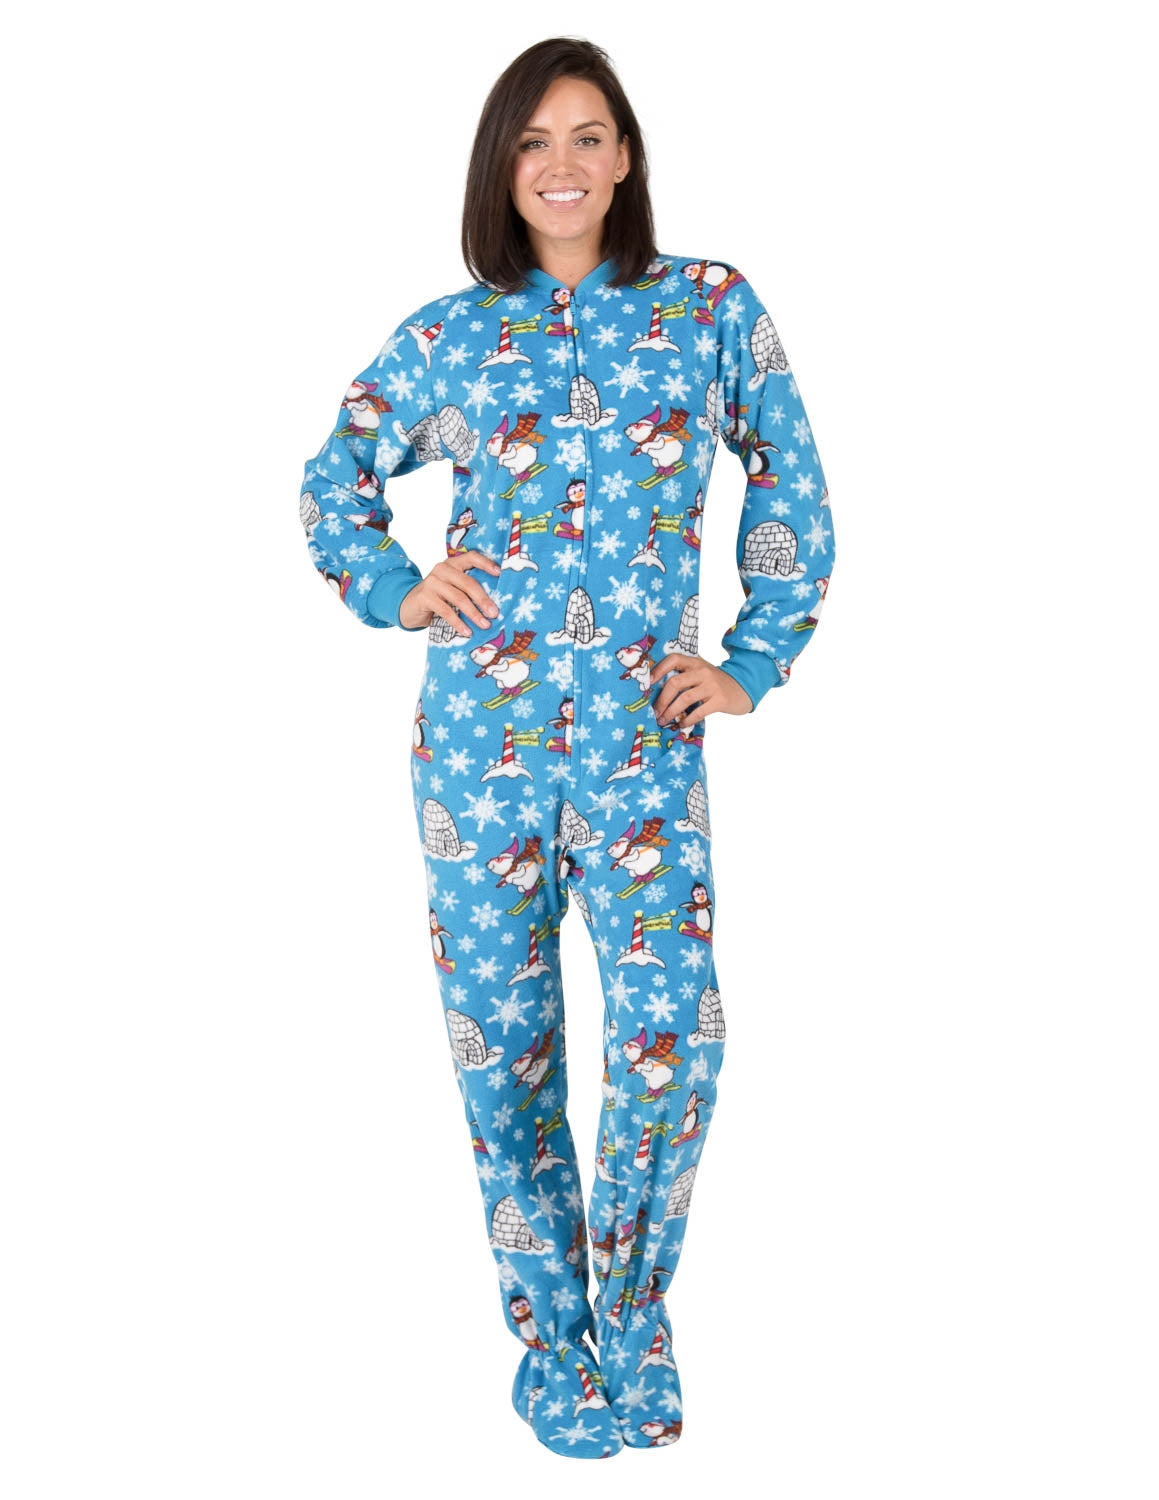 Alexander Del Rossa Women's Hooded Footed Pajamas, Plush, 45% OFF